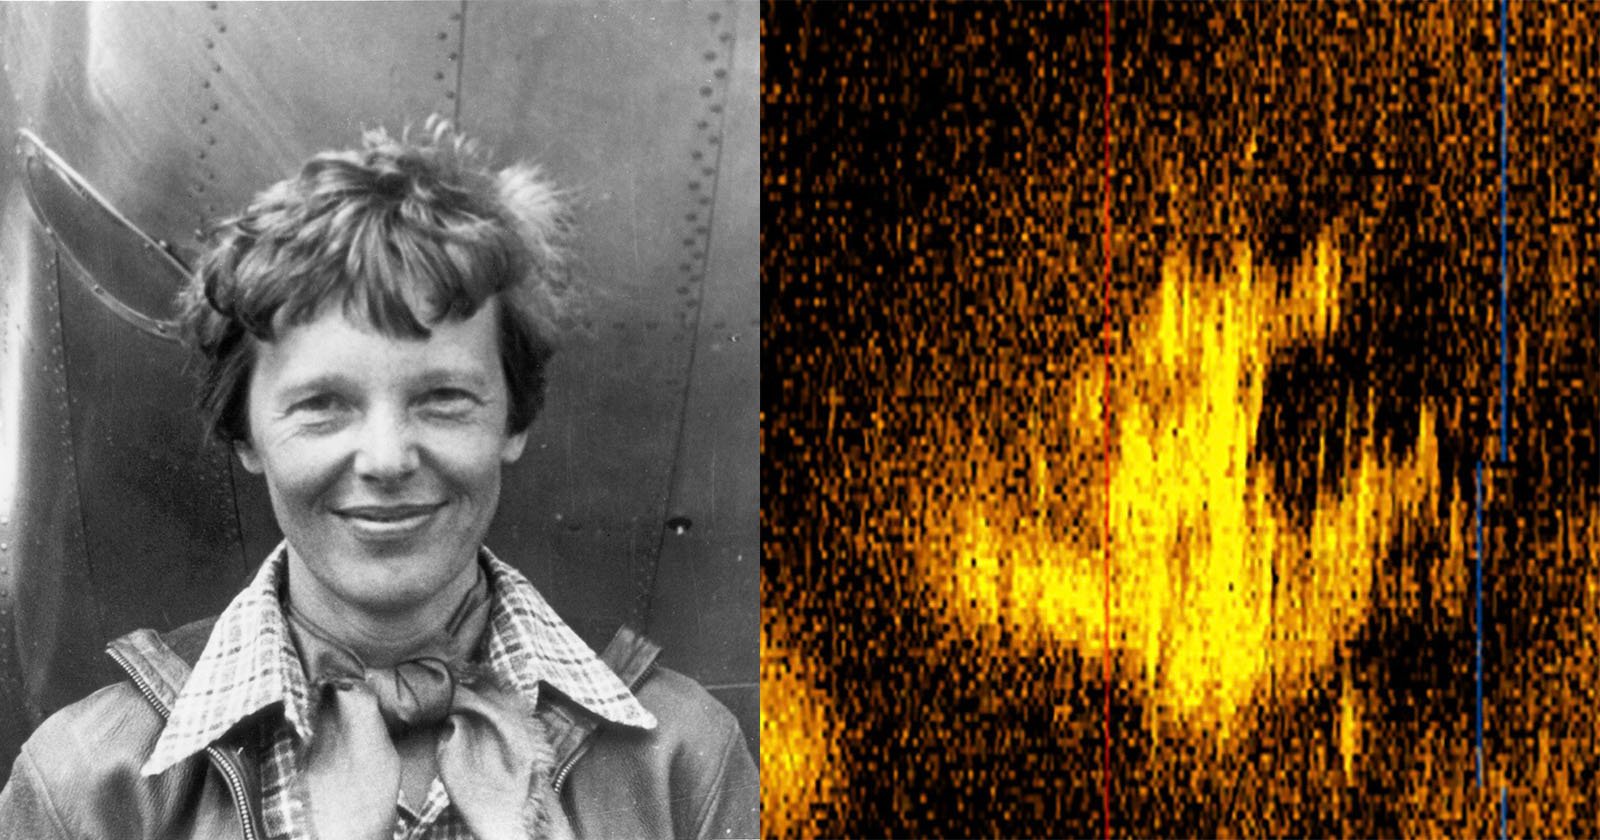  underwater drone might have captured image amelia earhart 